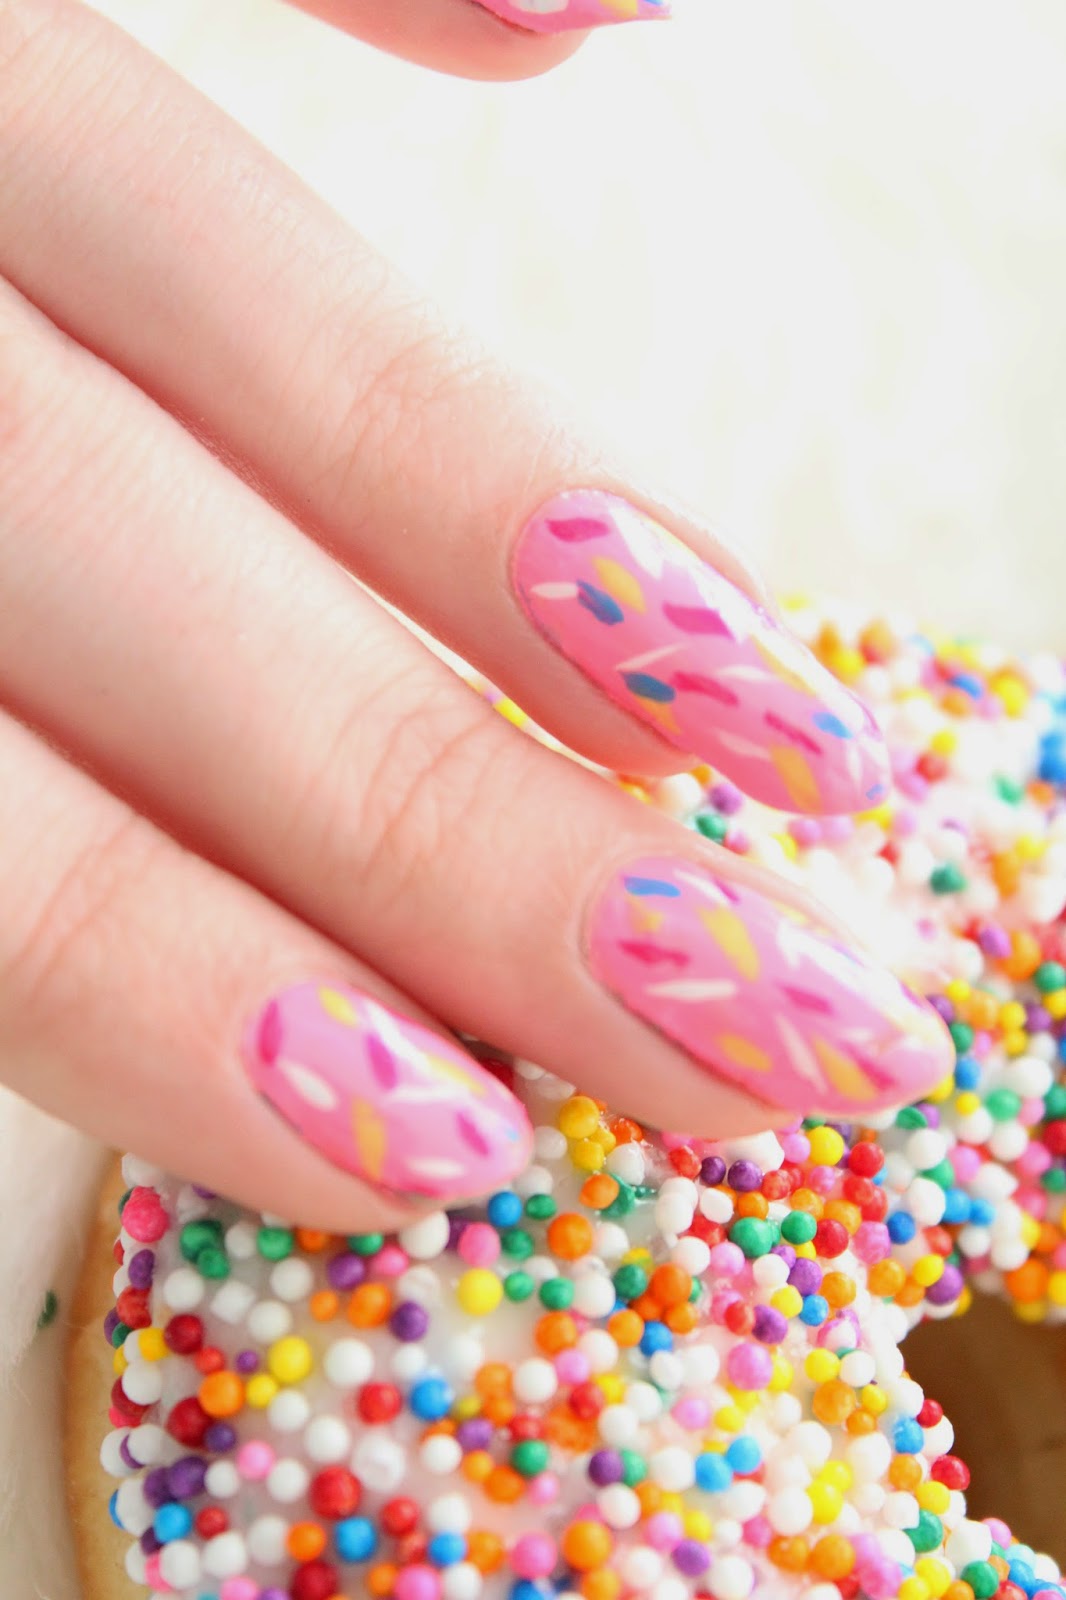 Pink Swatches and Gold Watches ♡: Donut Sprinkles